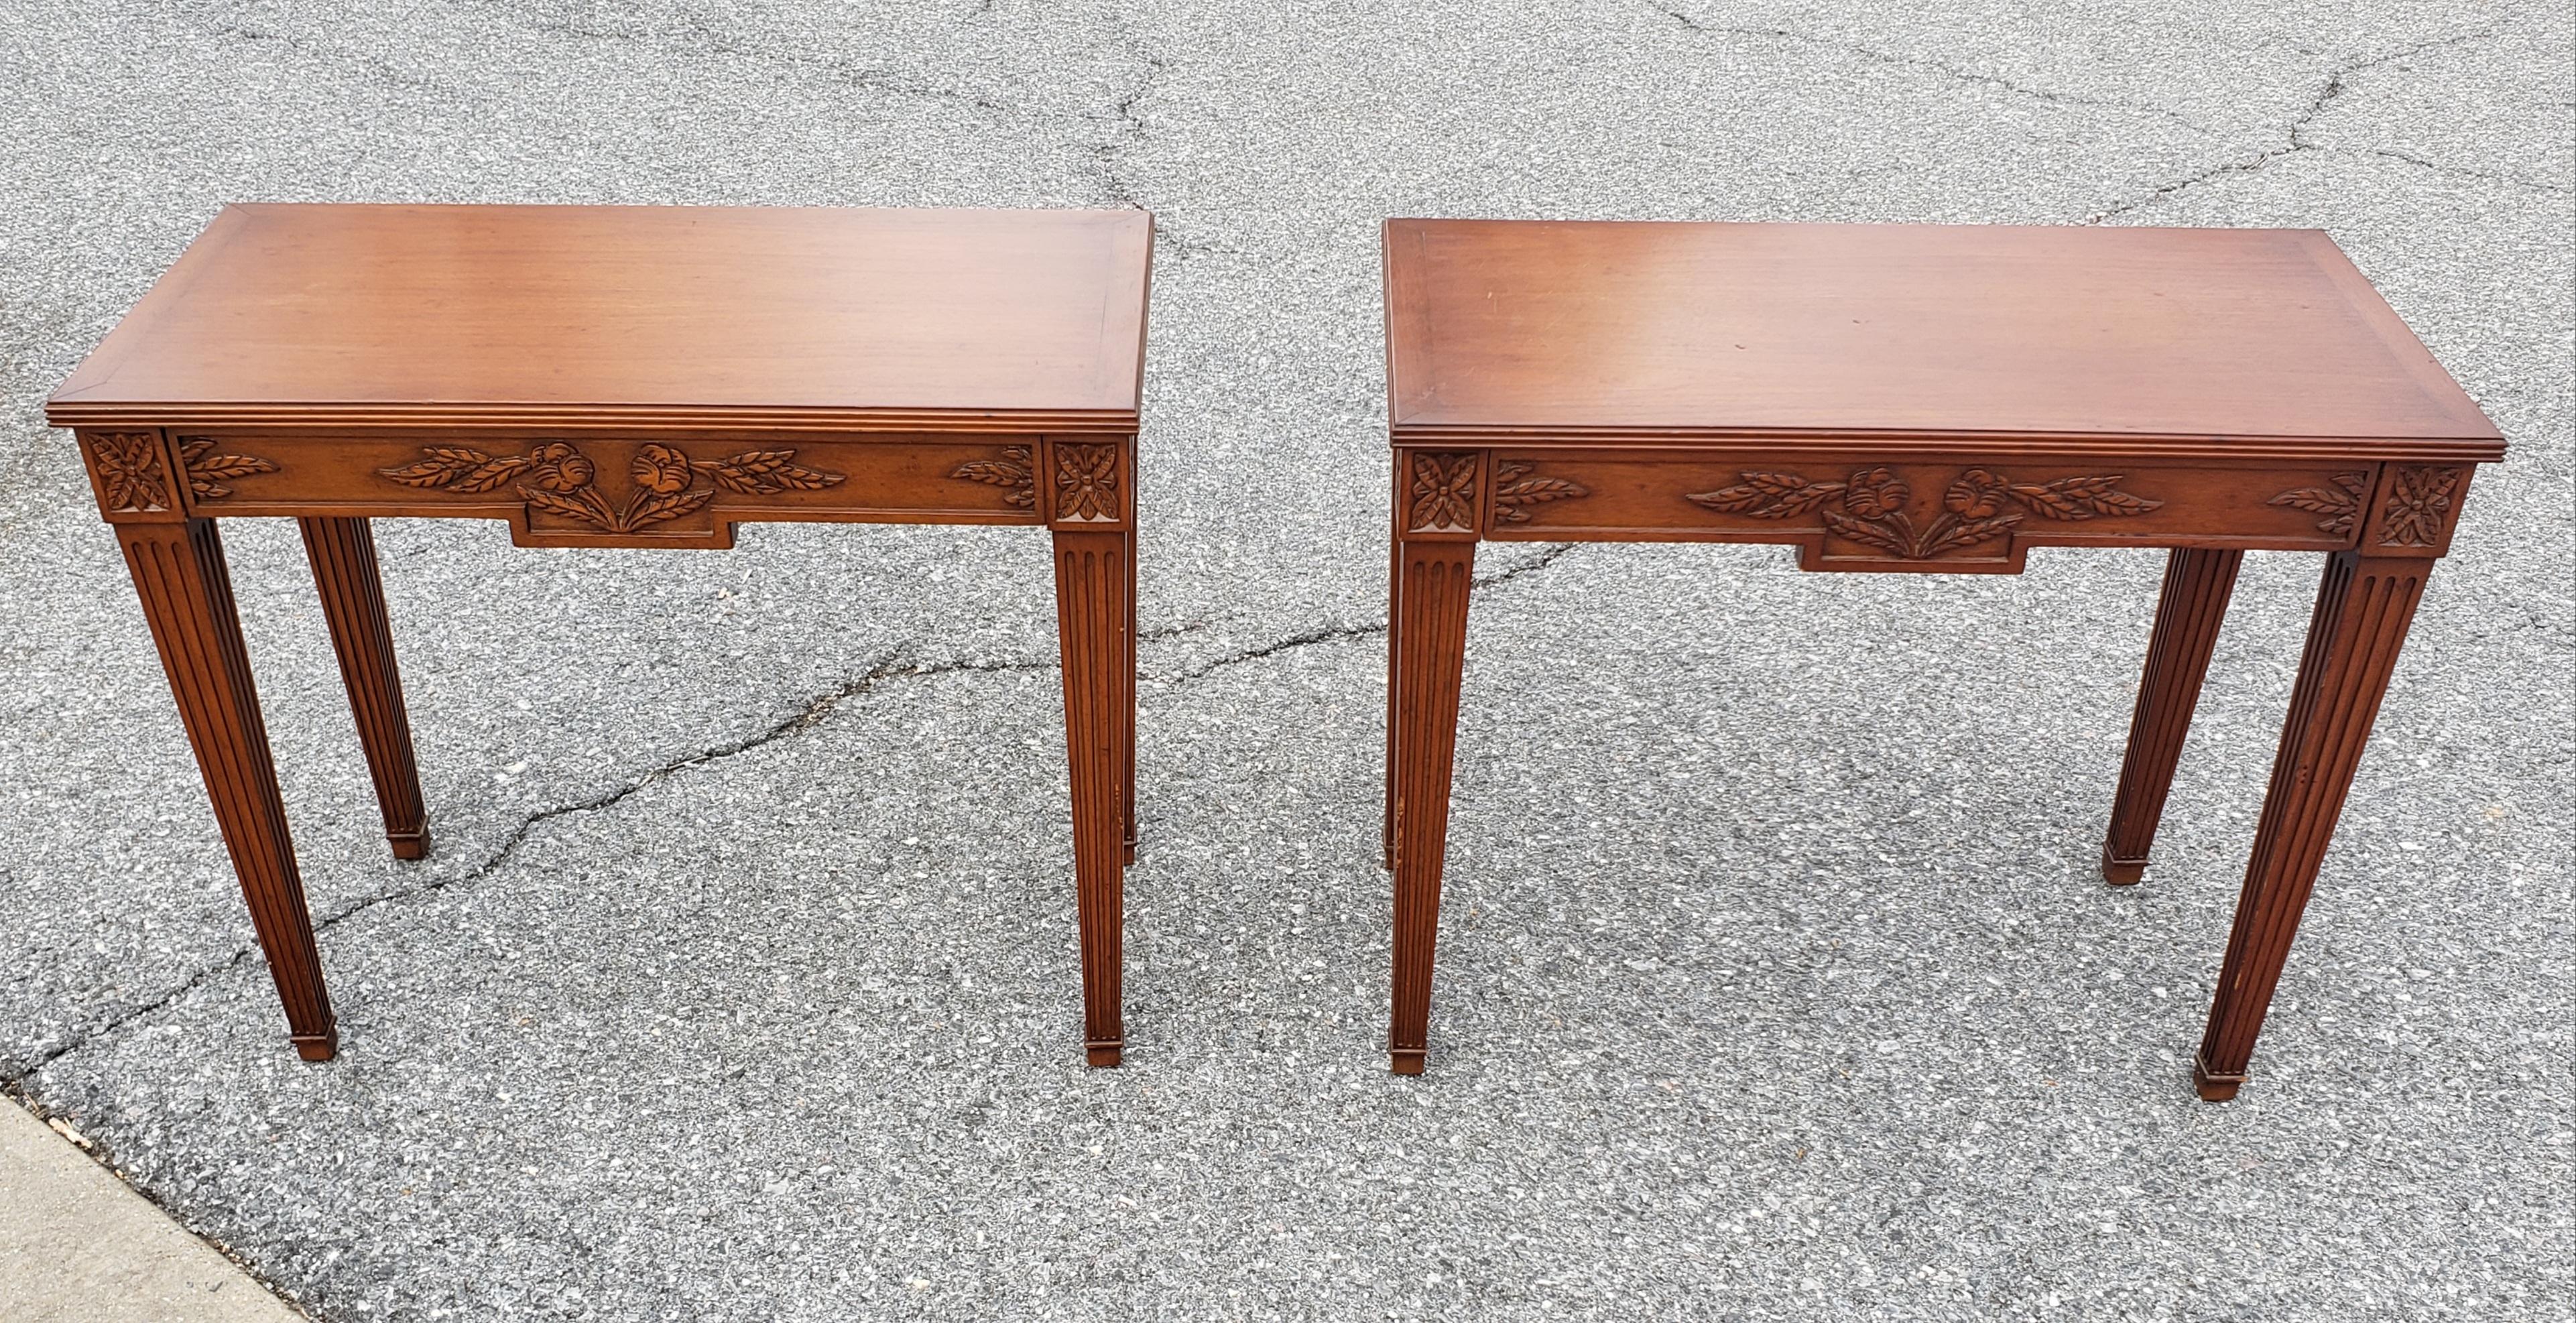 Rare amazing pair of Maslow Freen Louis XVI style single drawer side tables with amazing flower hand carvings. Finished on all sides and rear. Wide drawer and cannelure leg. Hand carved on all sides.
 